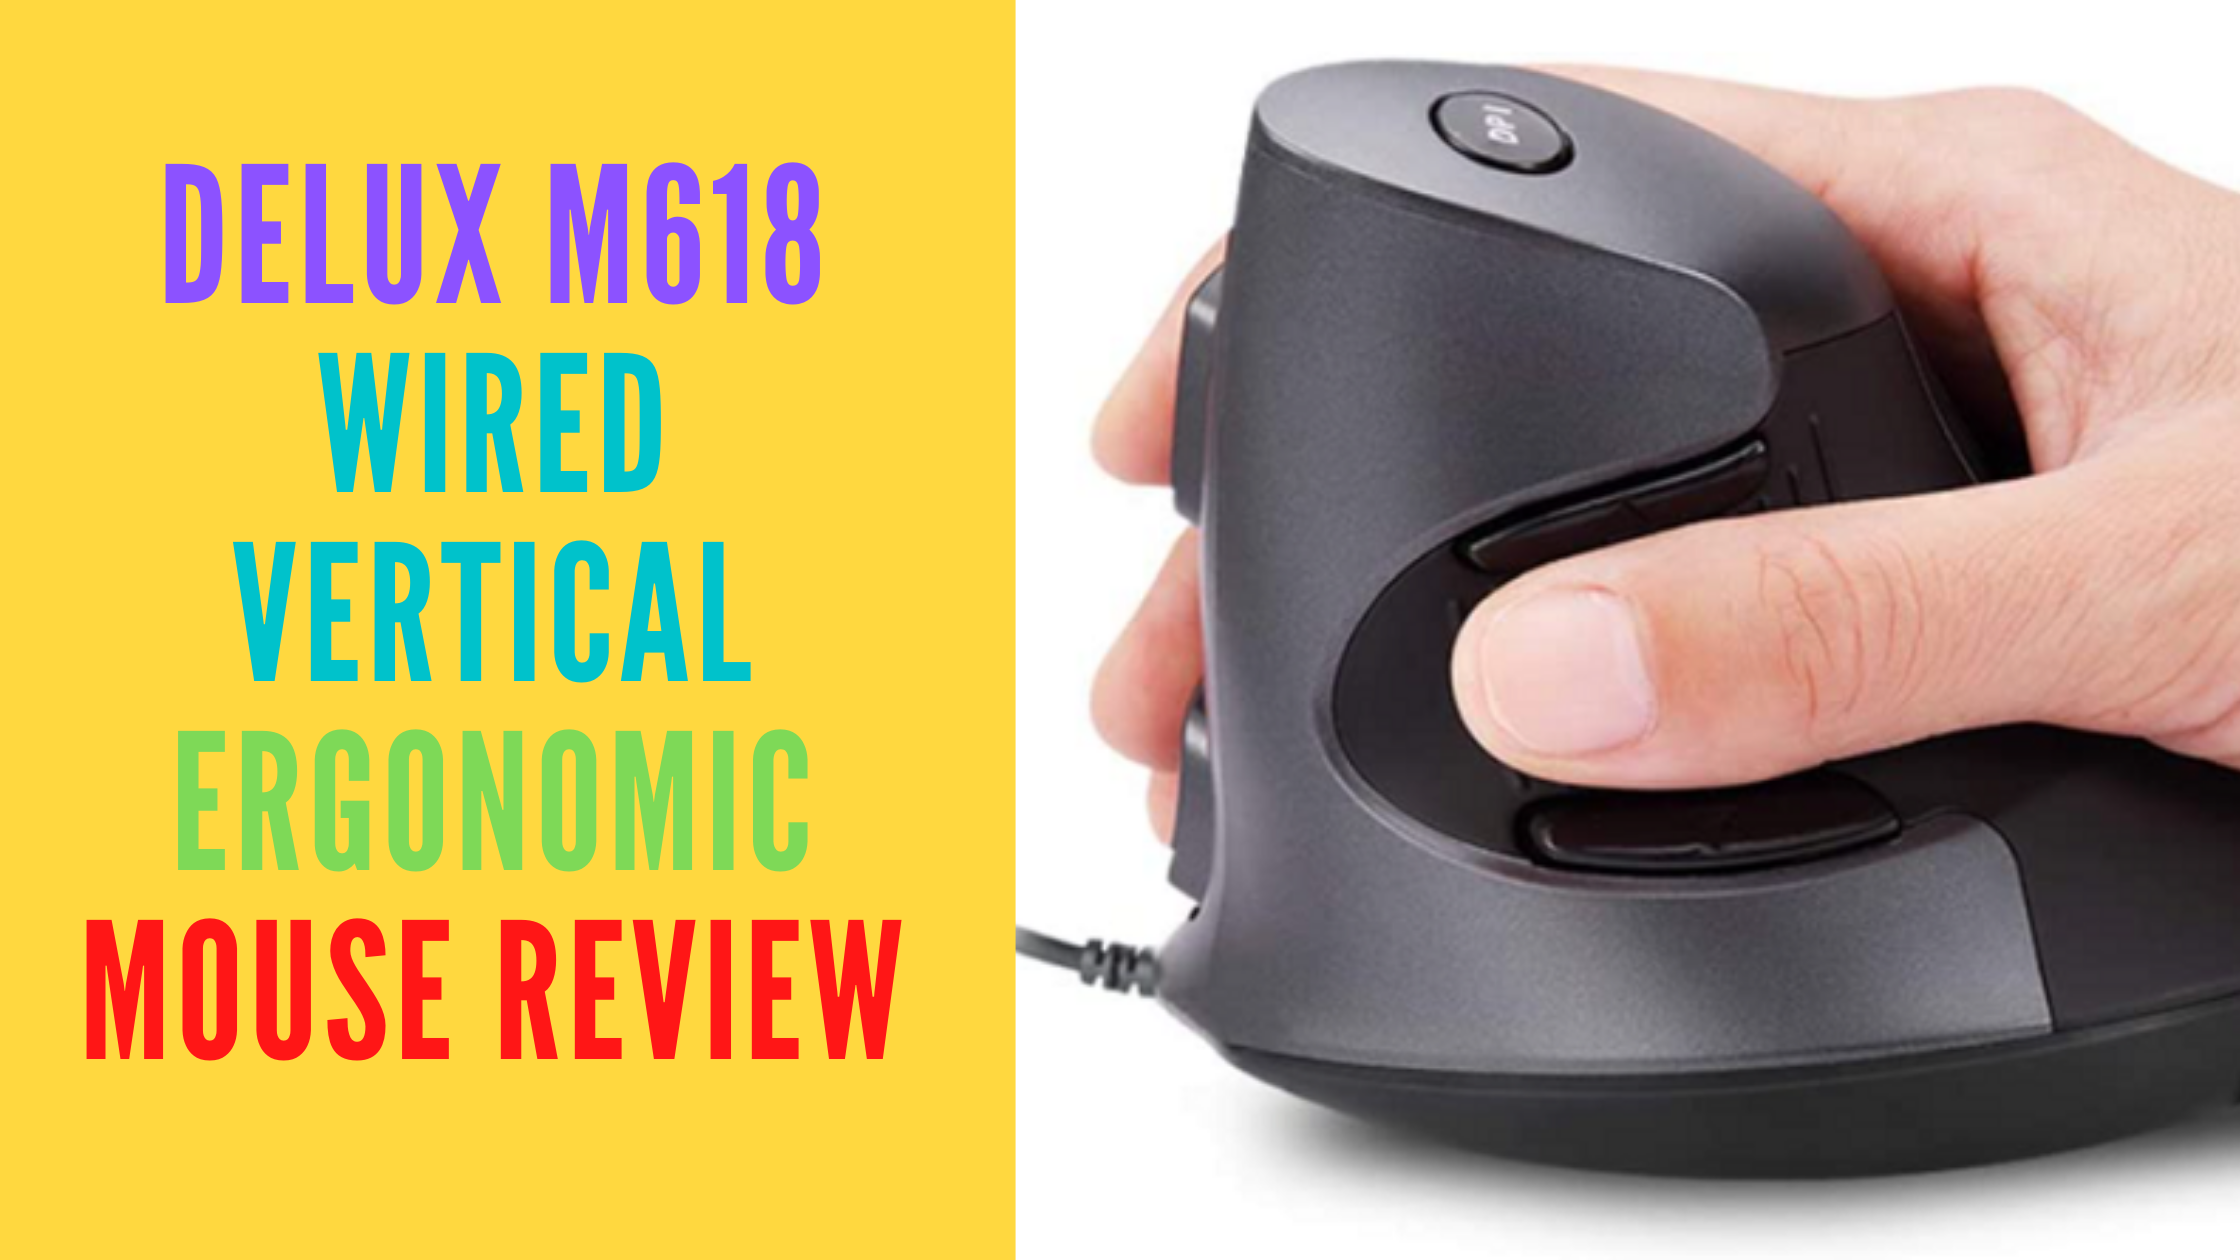 Delux M618 Wired Vertical Ergonomic Mouse